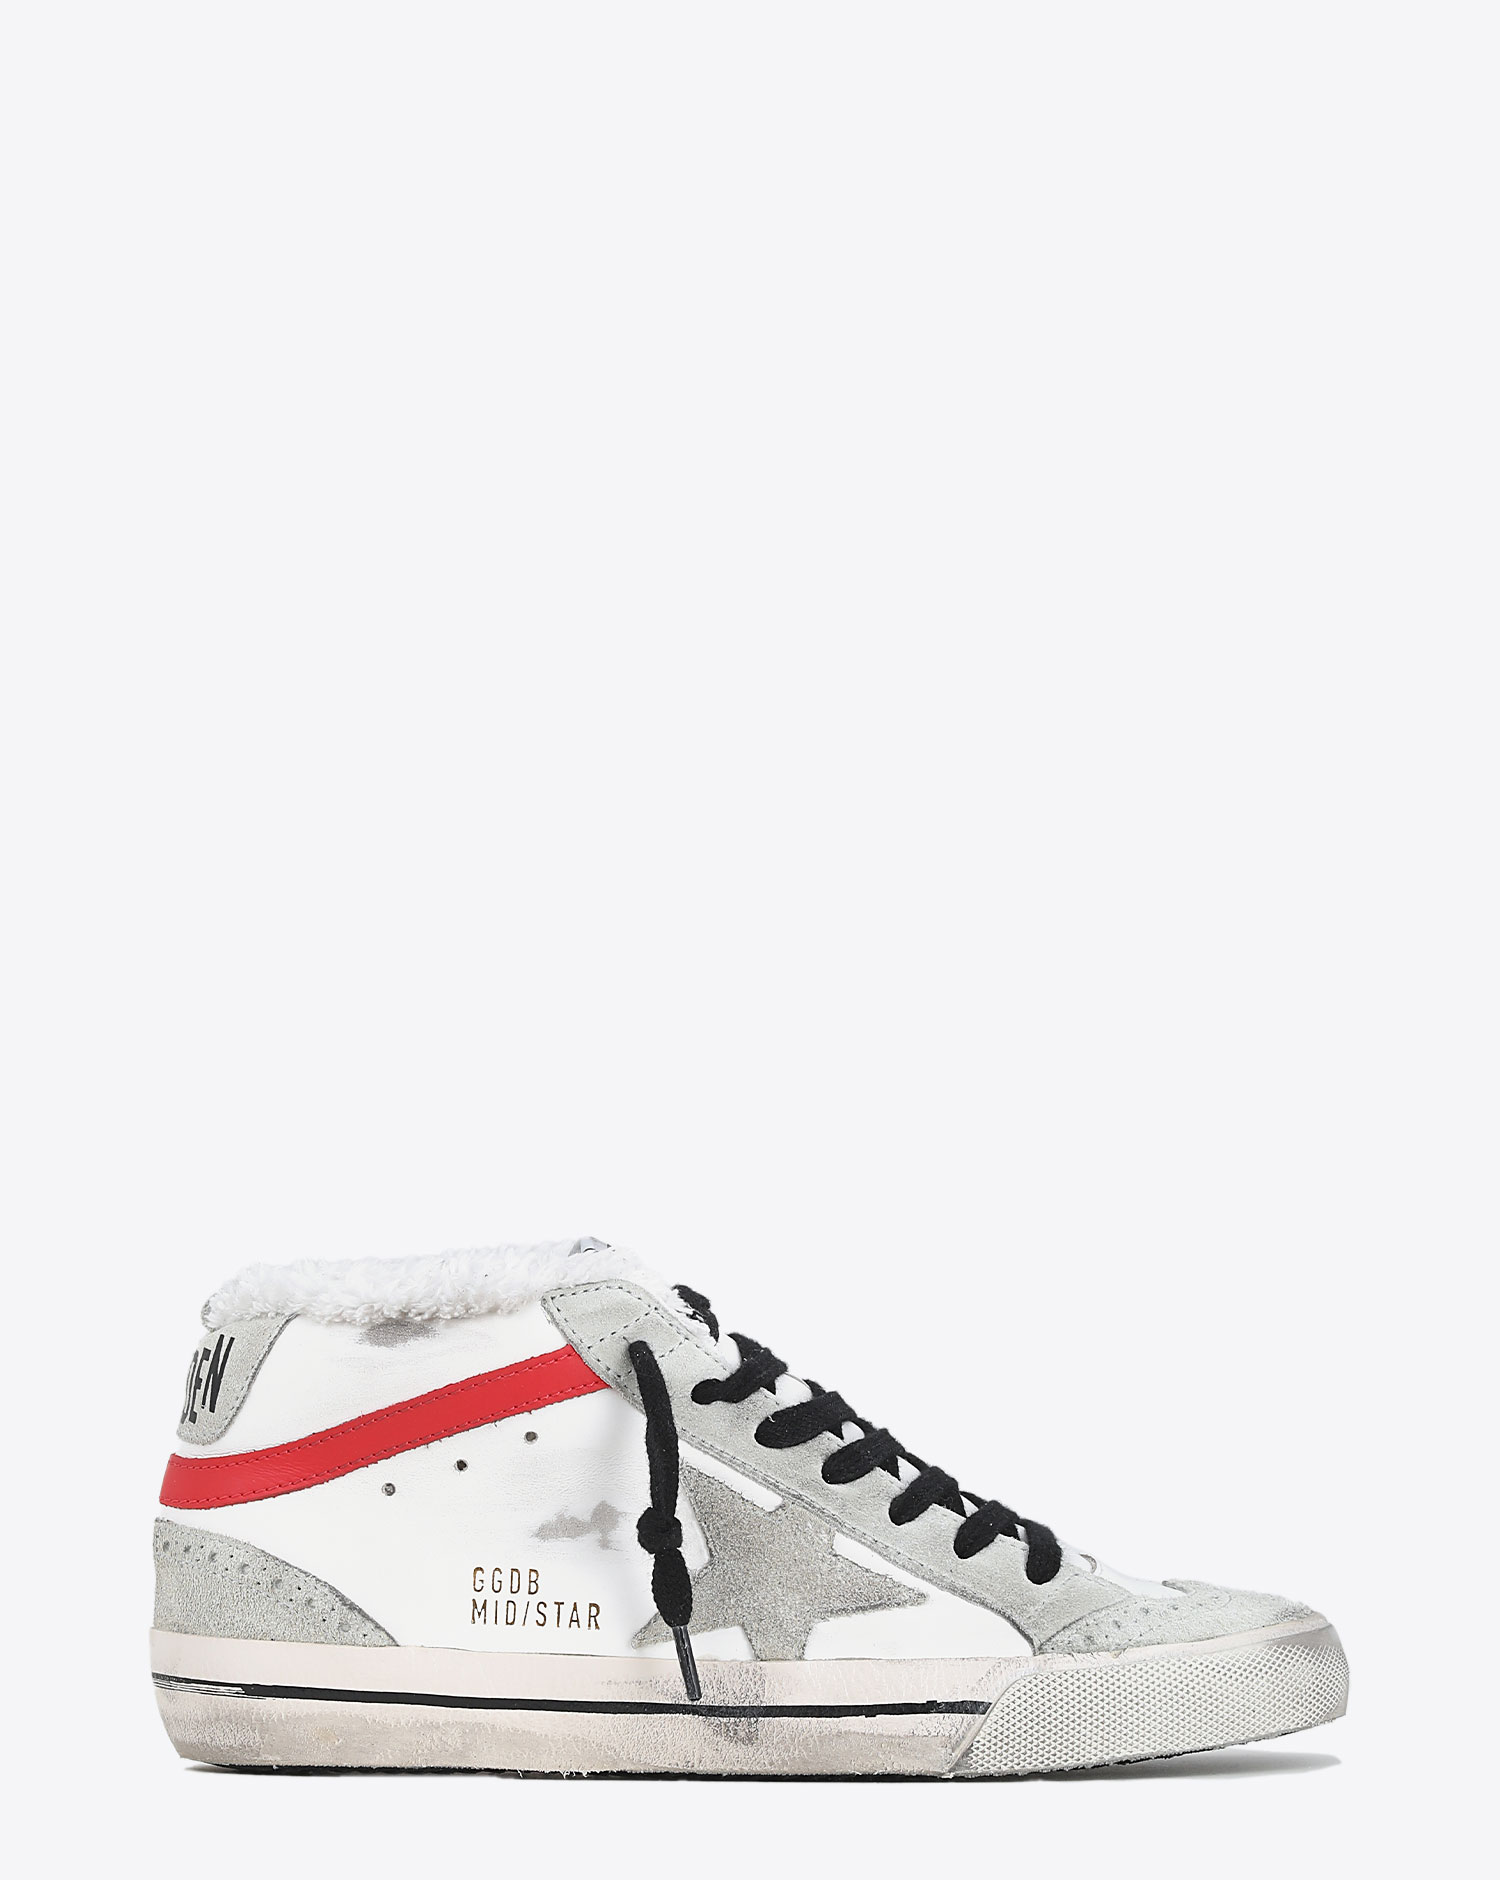 Sneakers Mid Star - Shearling White Ice Red 10218 Golden Goose. Profil. 